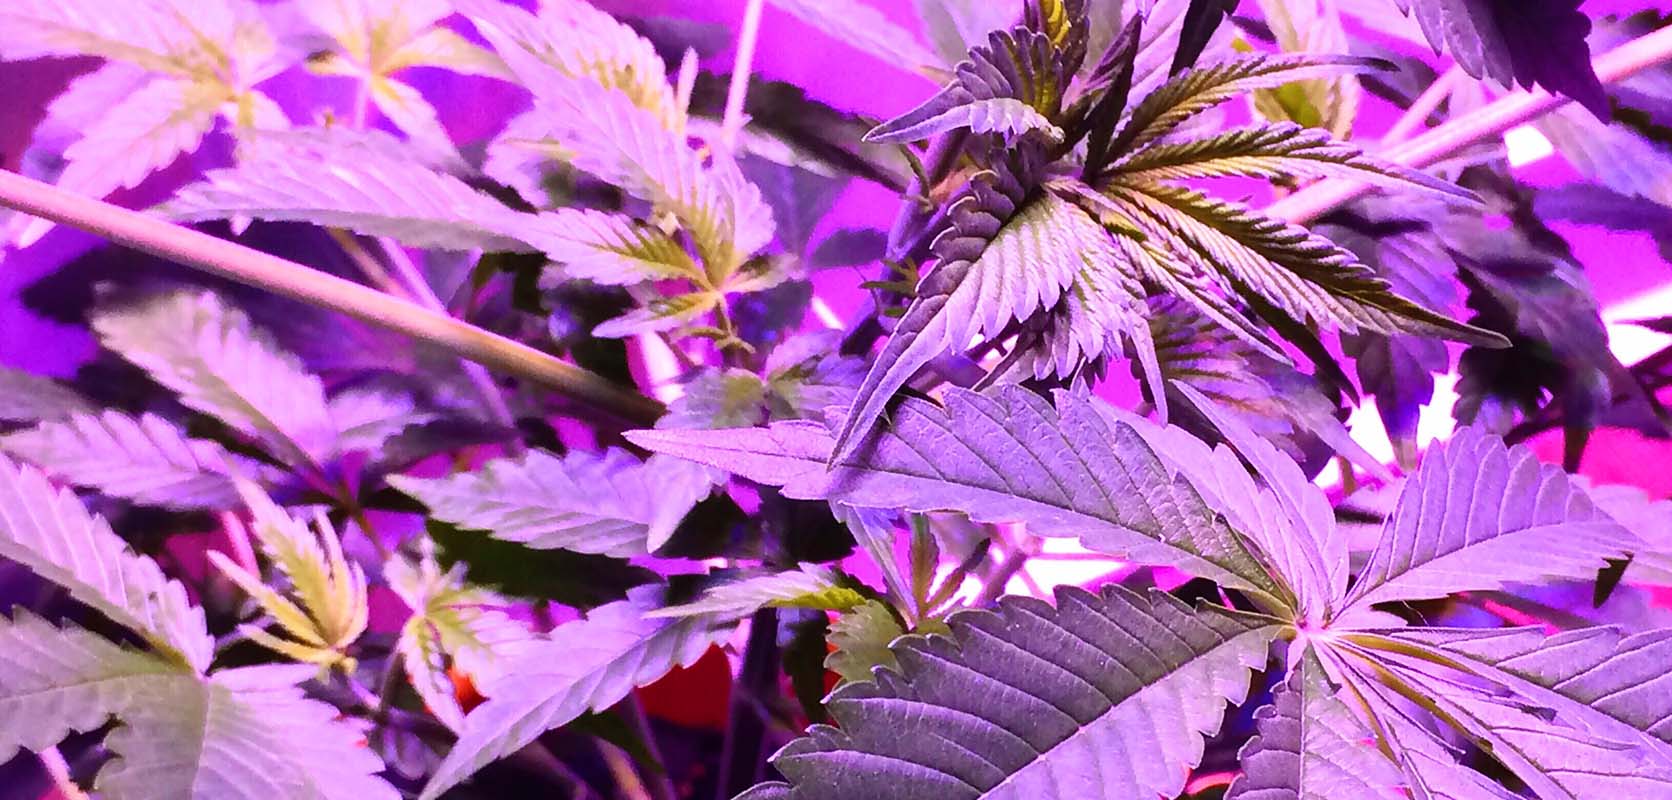 Gelato Strain cannabis plants under grow lights. Gelato Strain Review from online dispensary Low Price Bud cheap weed online in canada.